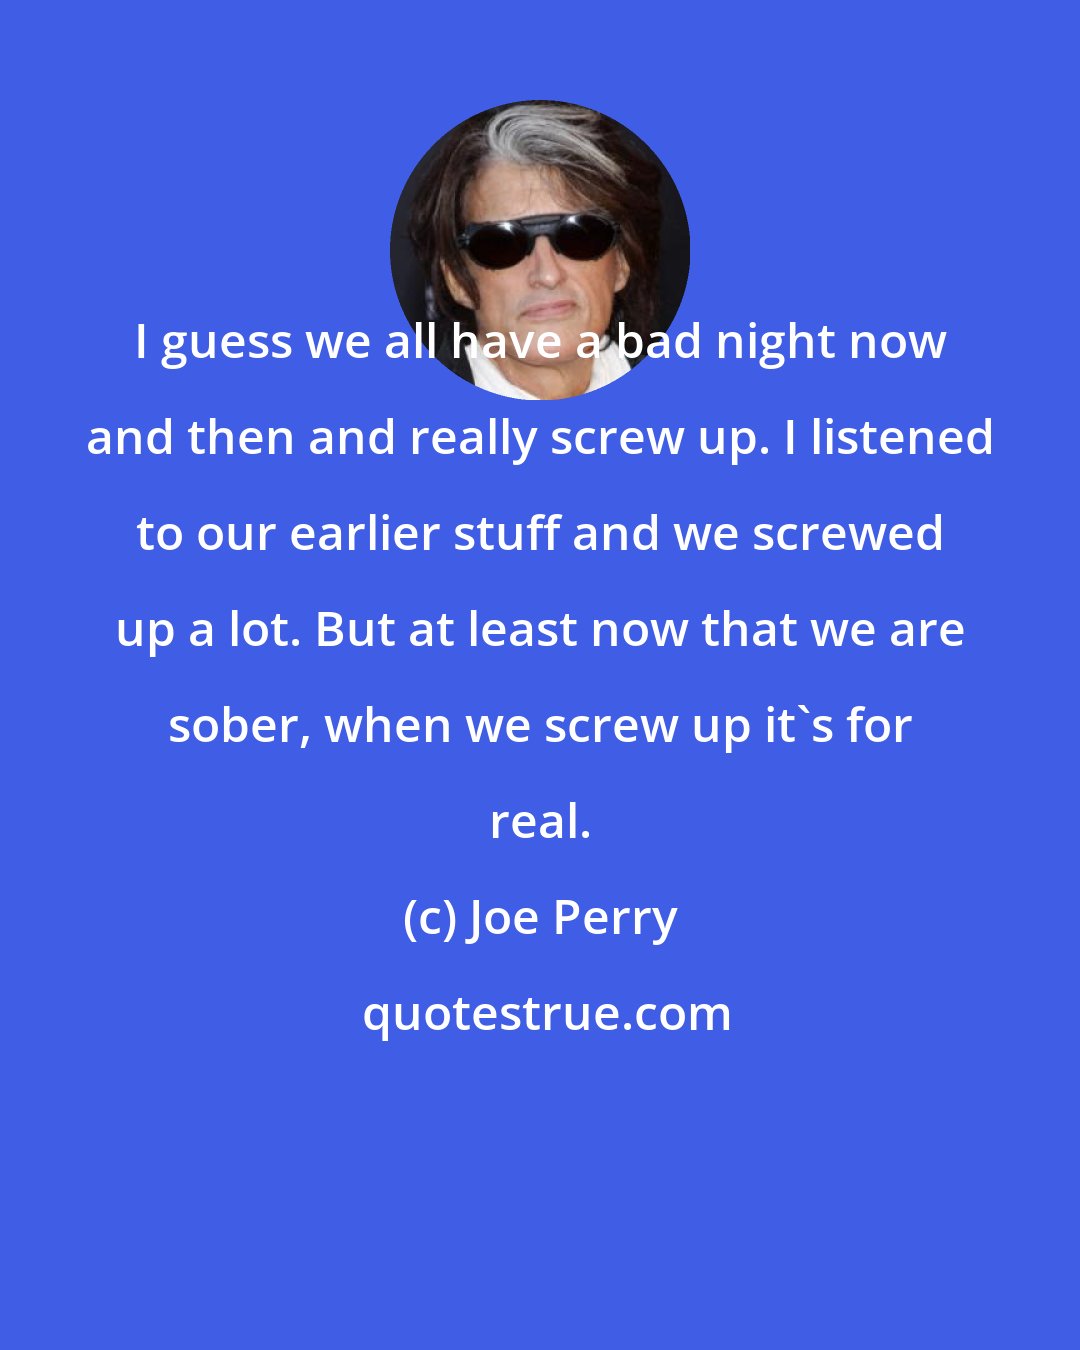 Joe Perry: I guess we all have a bad night now and then and really screw up. I listened to our earlier stuff and we screwed up a lot. But at least now that we are sober, when we screw up it's for real.